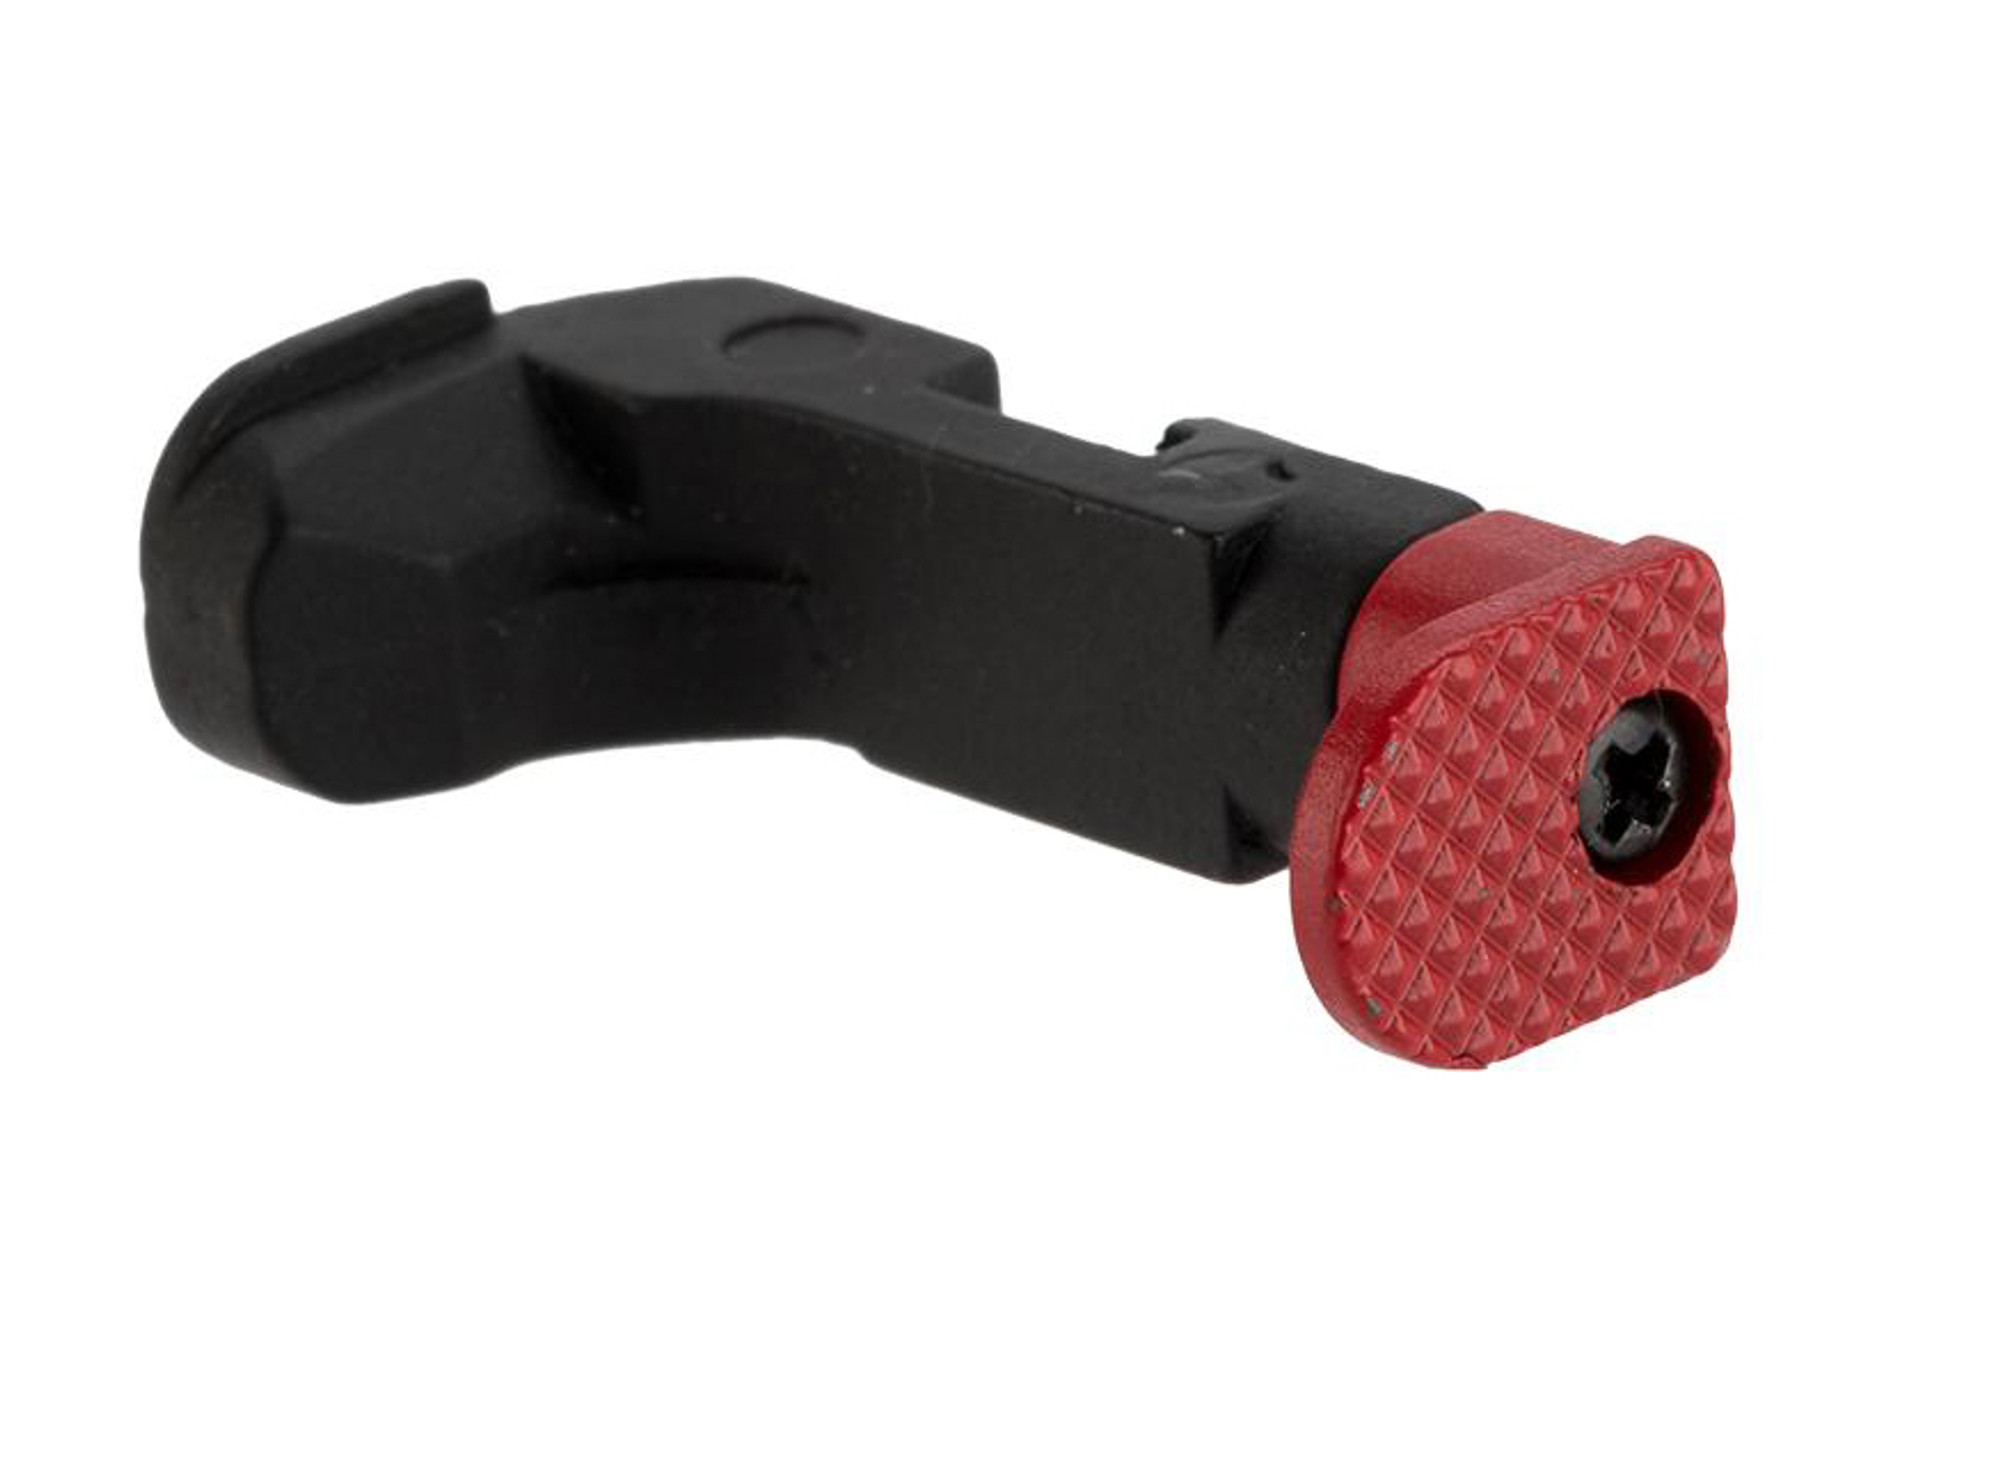 APS Competition Style Magazine Catch for APS ACP / CAP Airsoft Pistols (Color: Red)